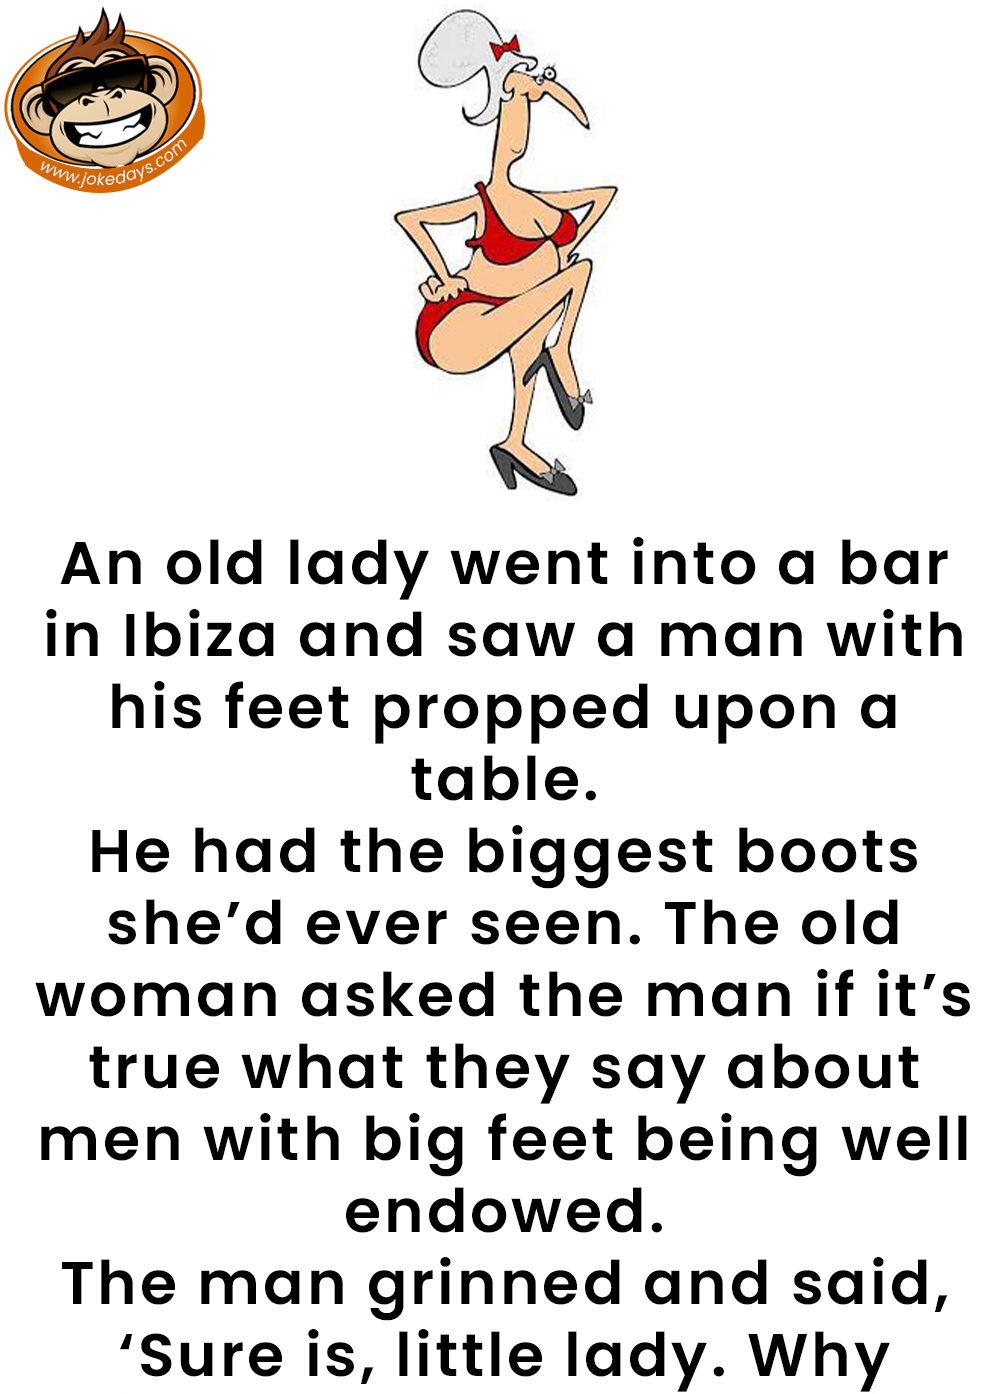 The Biggest Boots